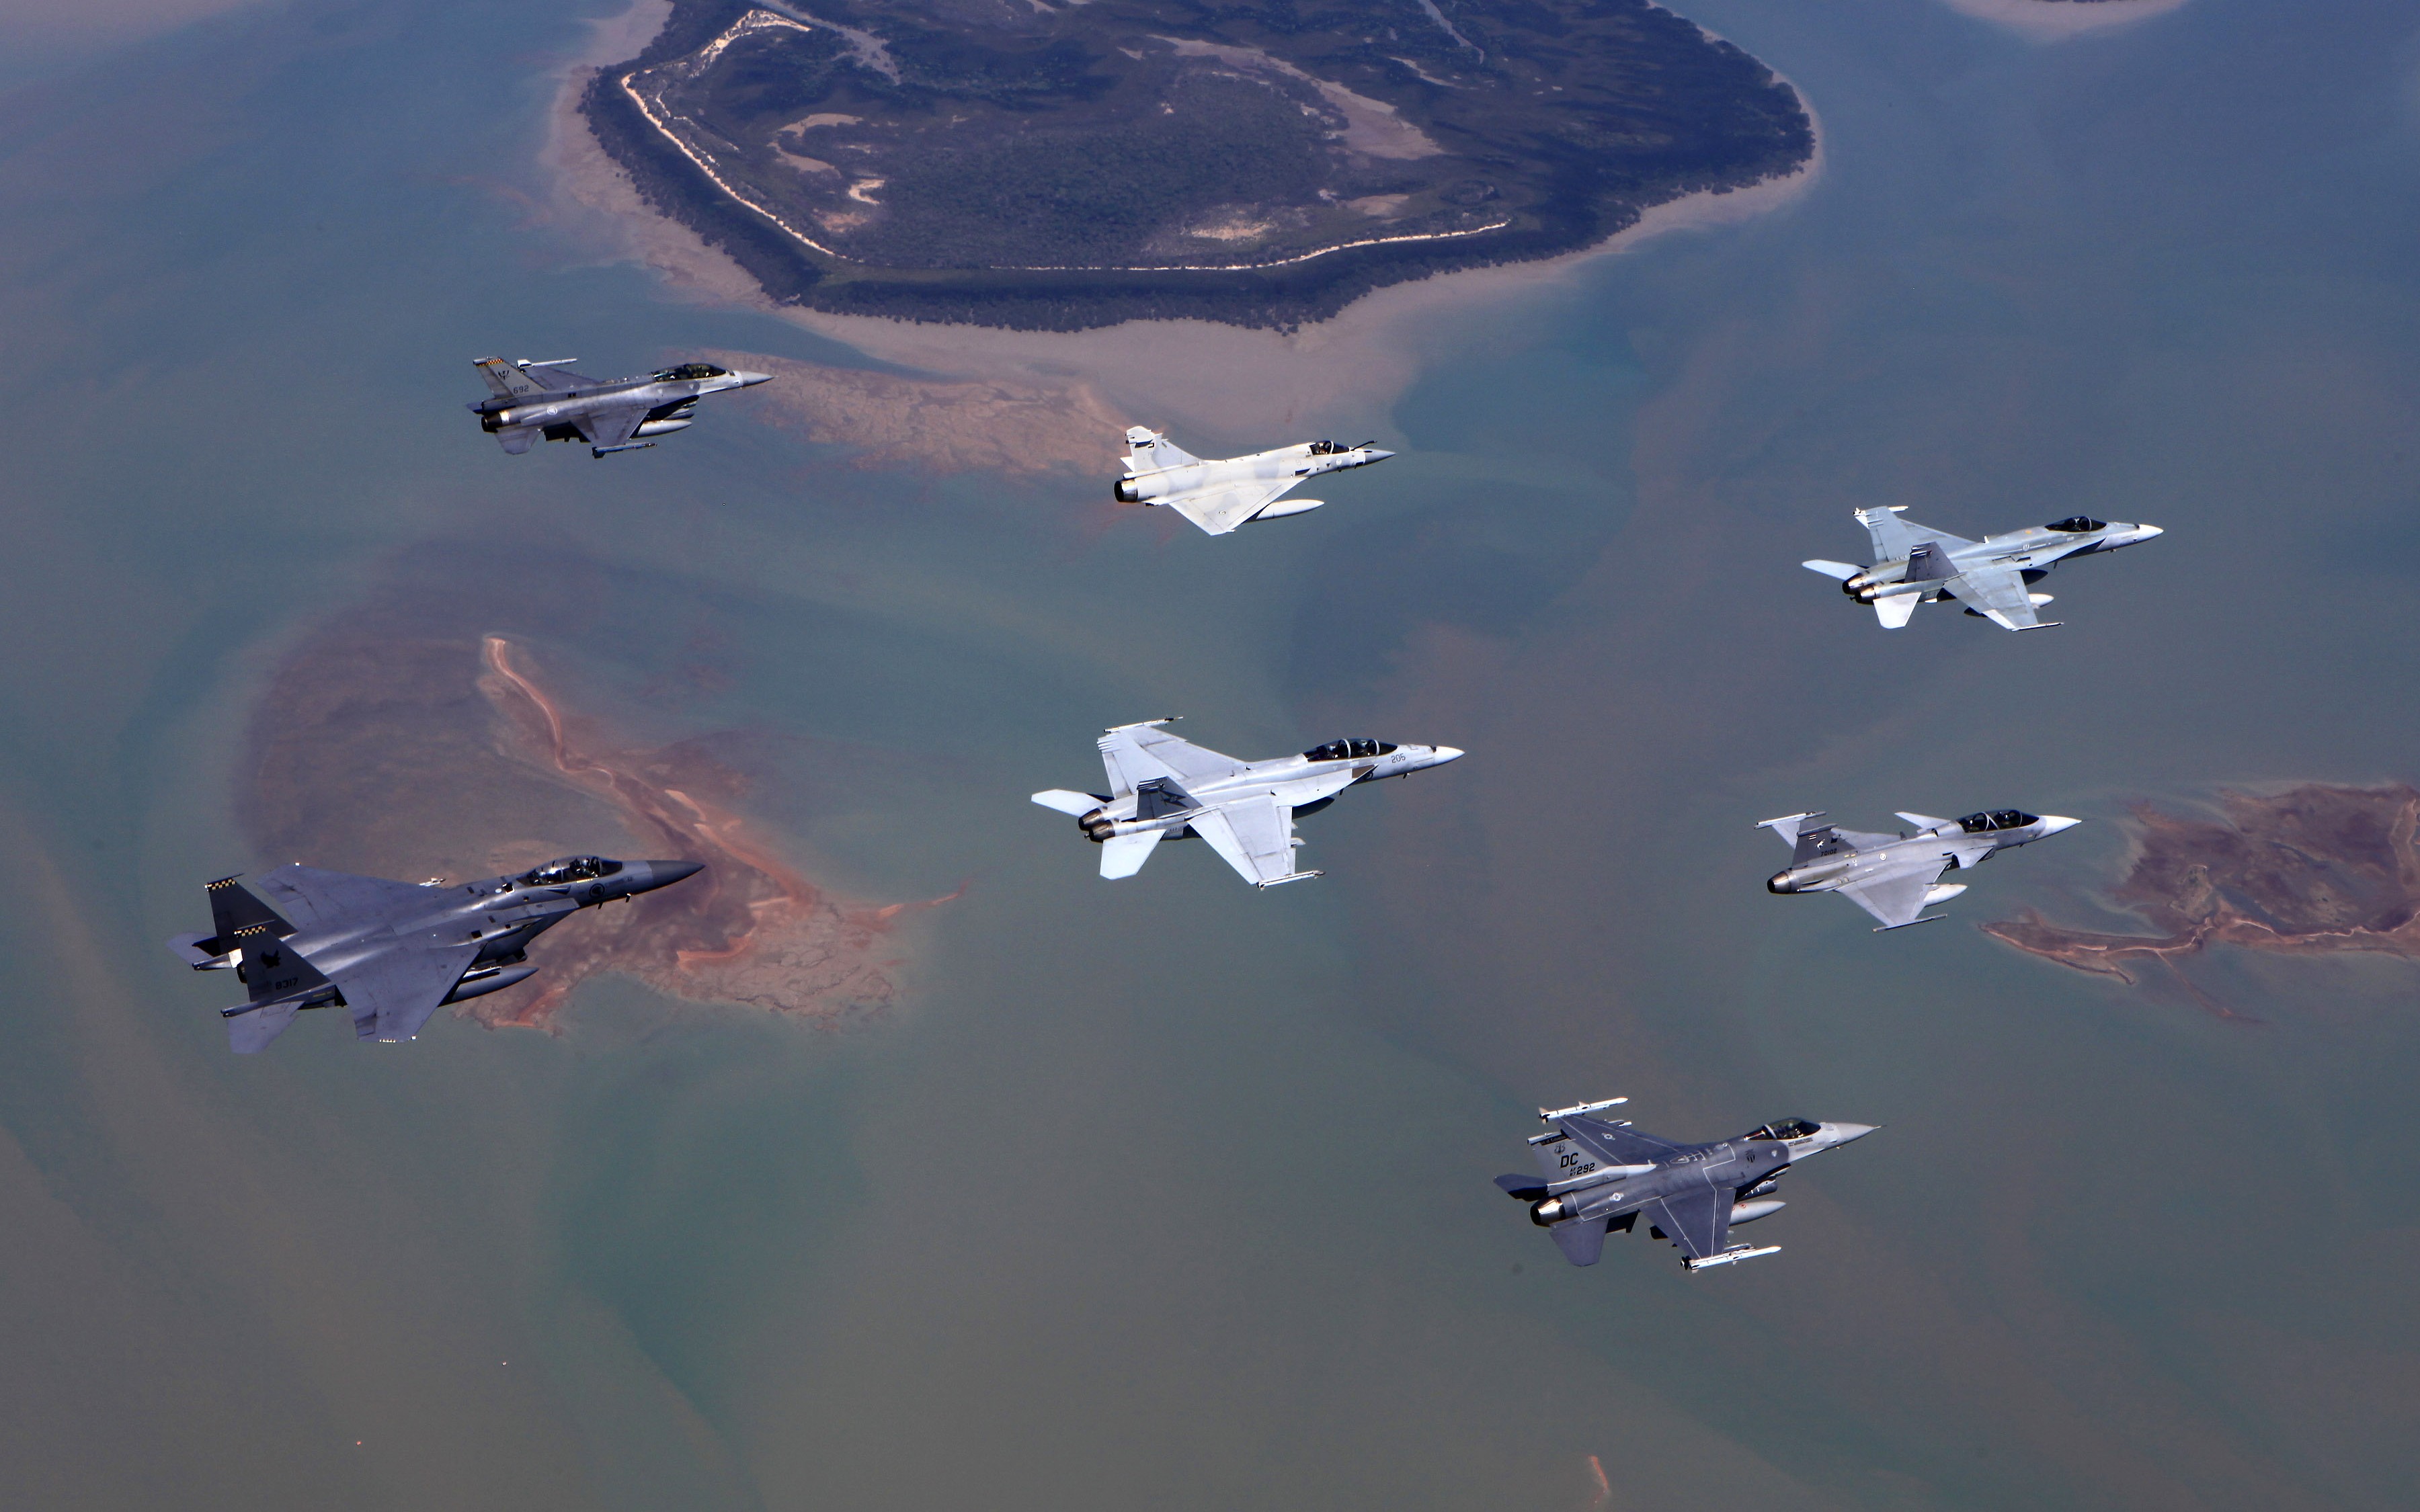 McDonnell Douglas F 15 Eagle, General Dynamics F 16 Fighting Falcon, McDonnell Douglas F A 18 Hornet, Dassault Mirage 2000N, JAS 39 Gripen, Military aircraft, Aircraft, Aerial view Wallpaper